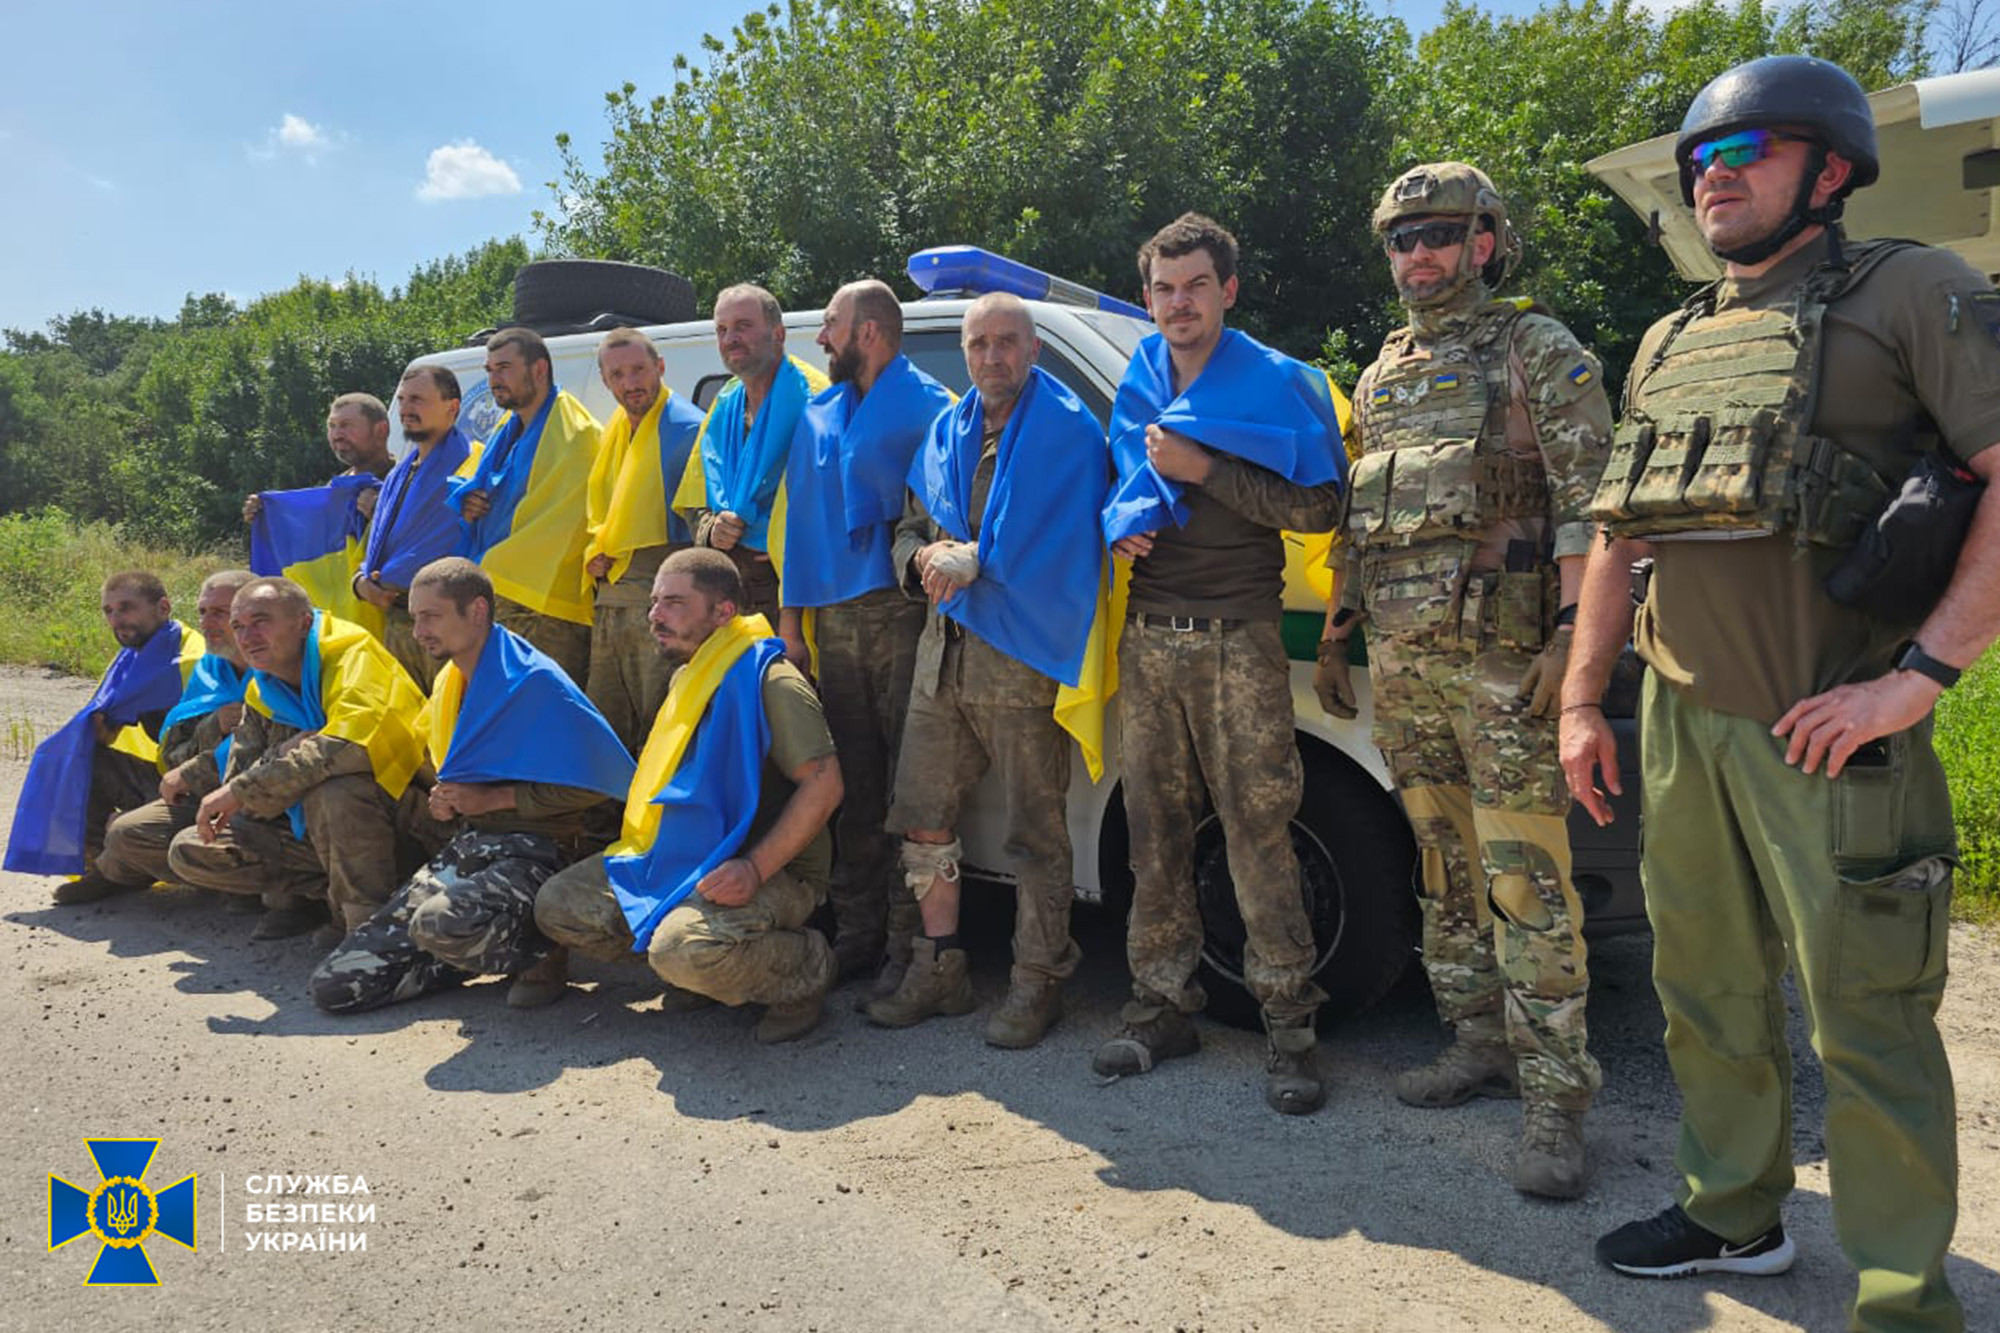 Another 22 Ukrainian soldiers were released from captivity today